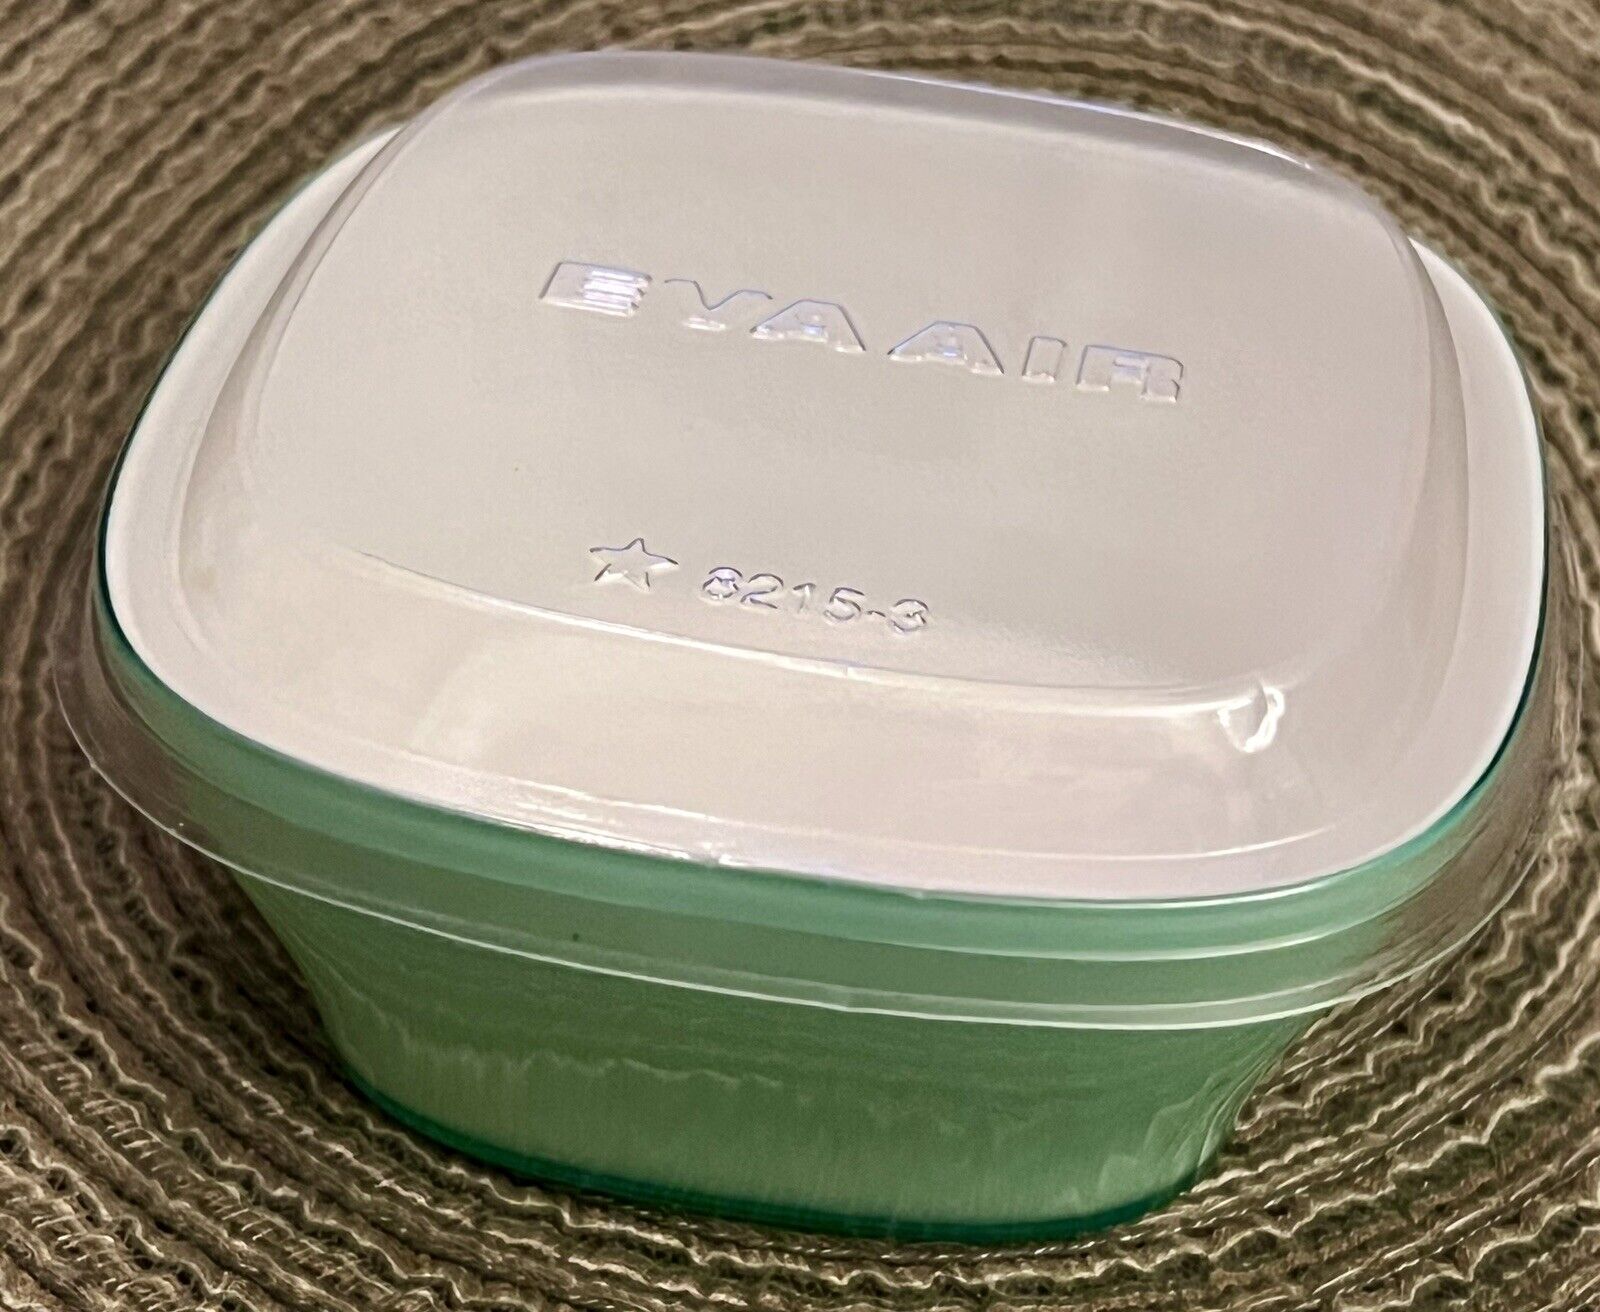 EVA AIR AIRLINES AIRWAYS FOOD GREEN ACRYLIC BOWL 3.5”A NICE AVIATION COLLECTIBLE